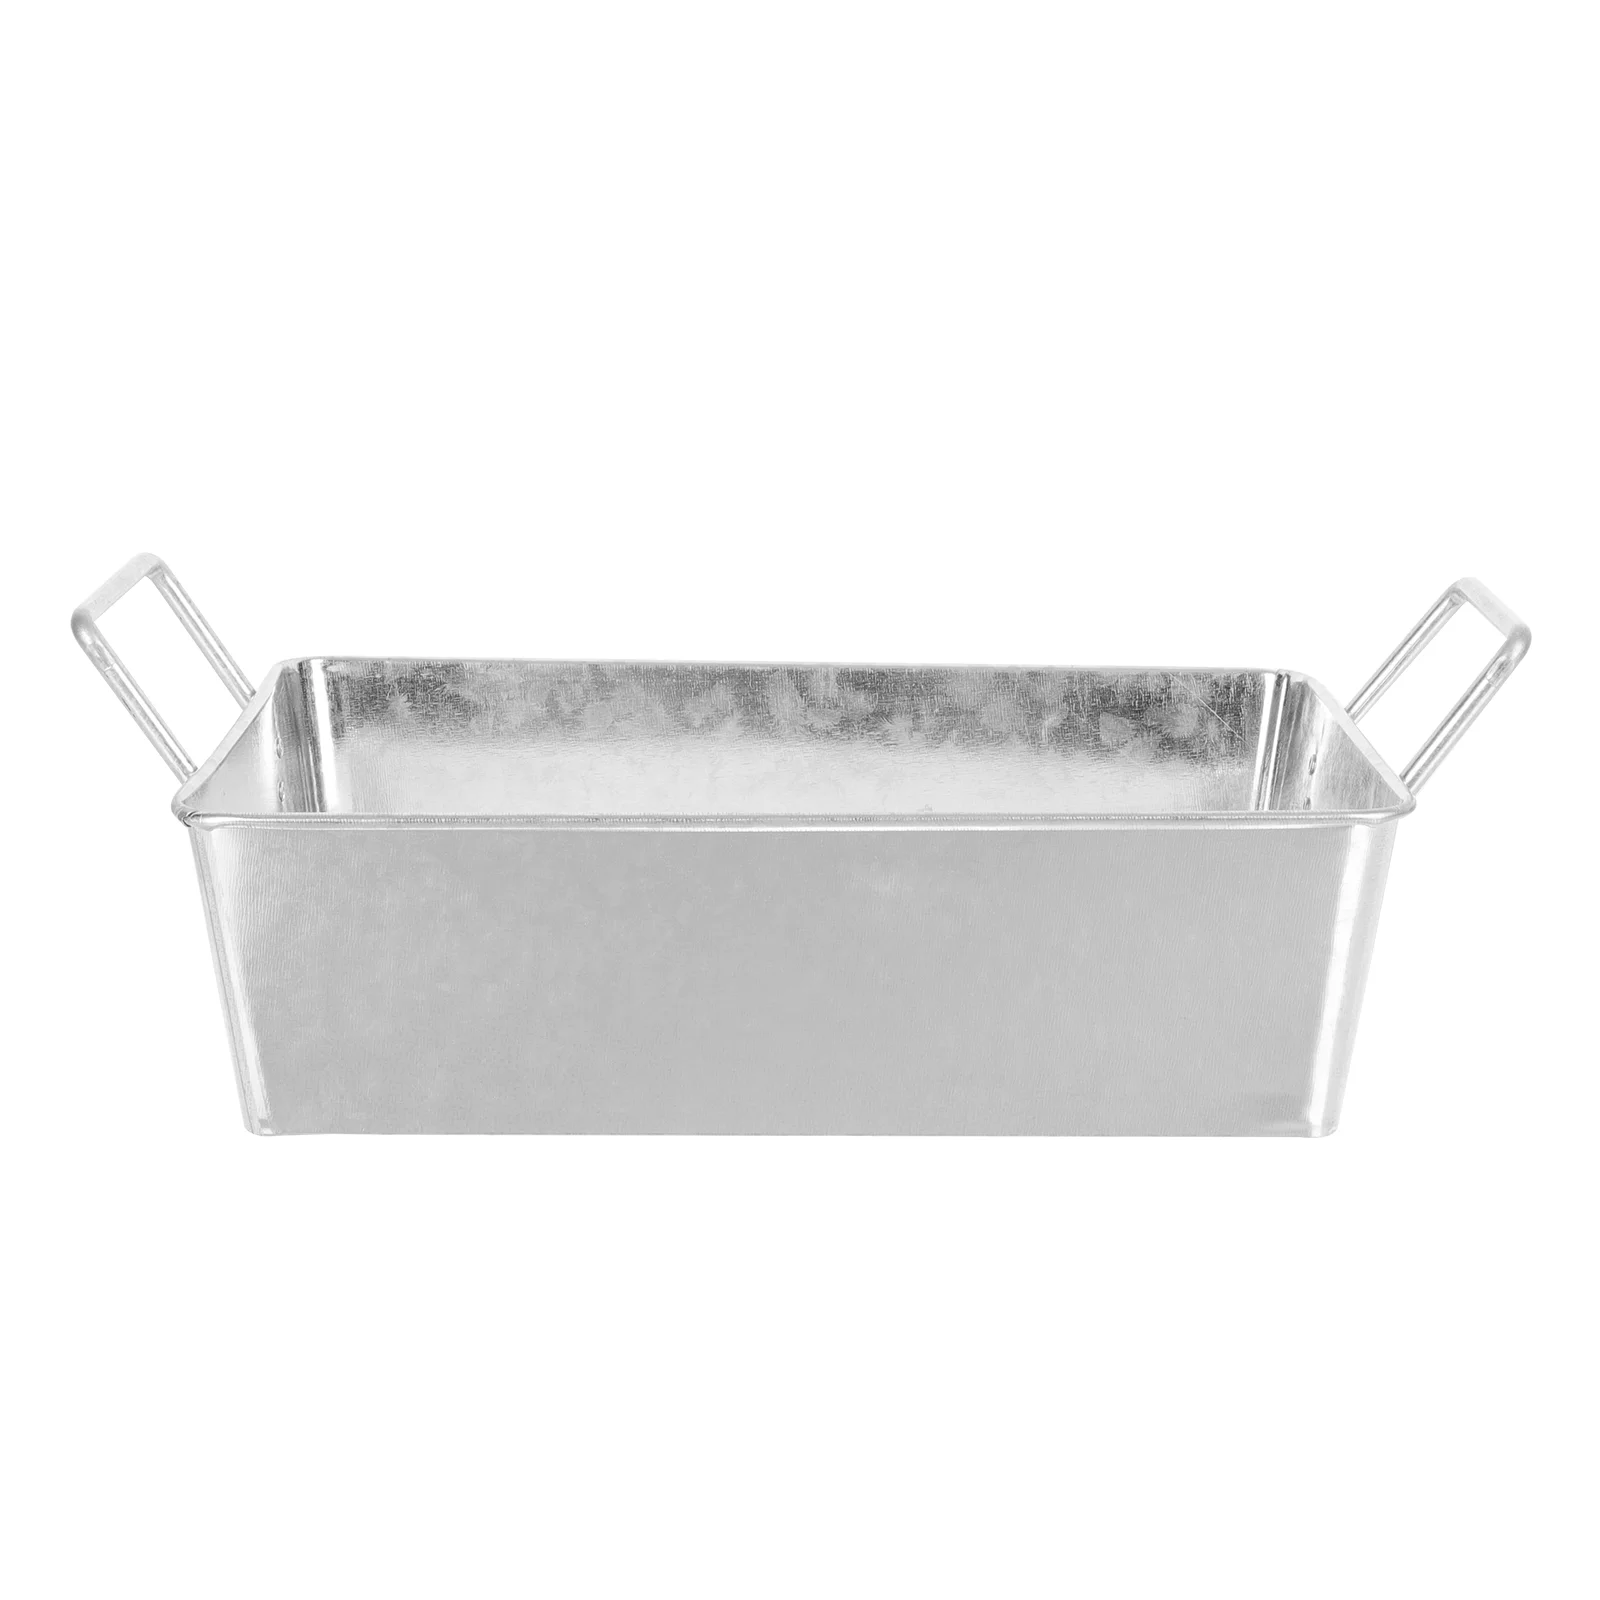 

Metal Tin Buckets Tub Party Ice Pails Galvanized Bucket Pail Plate Holder Baking Tubs Parties Drinks Drink Beverage Dish Trays